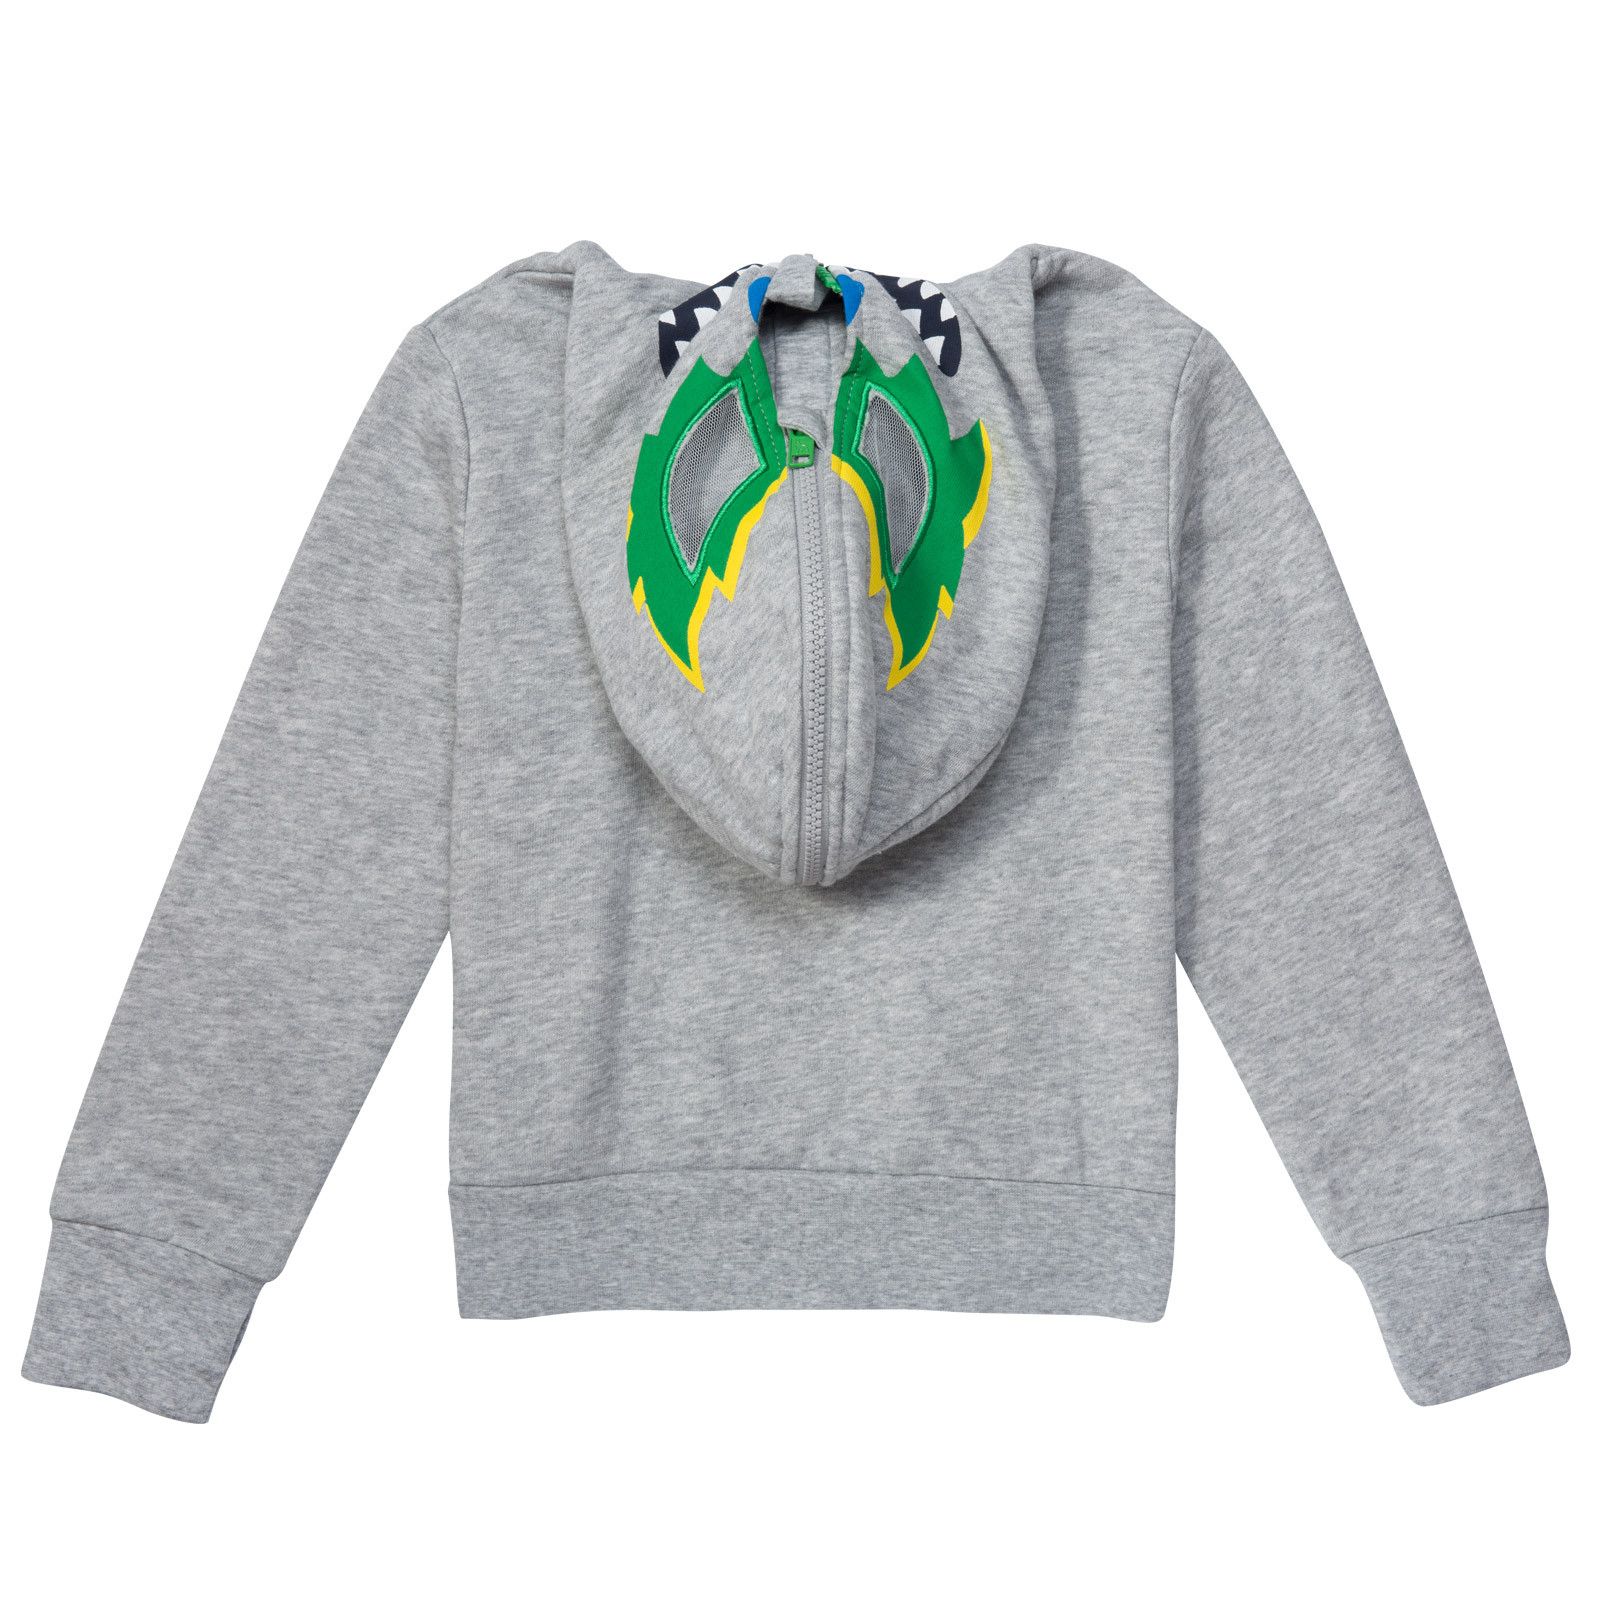 Bandit Boys Grey Hooded Zip-Up Top With Monster Print - CÉMAROSE | Children's Fashion Store - 2